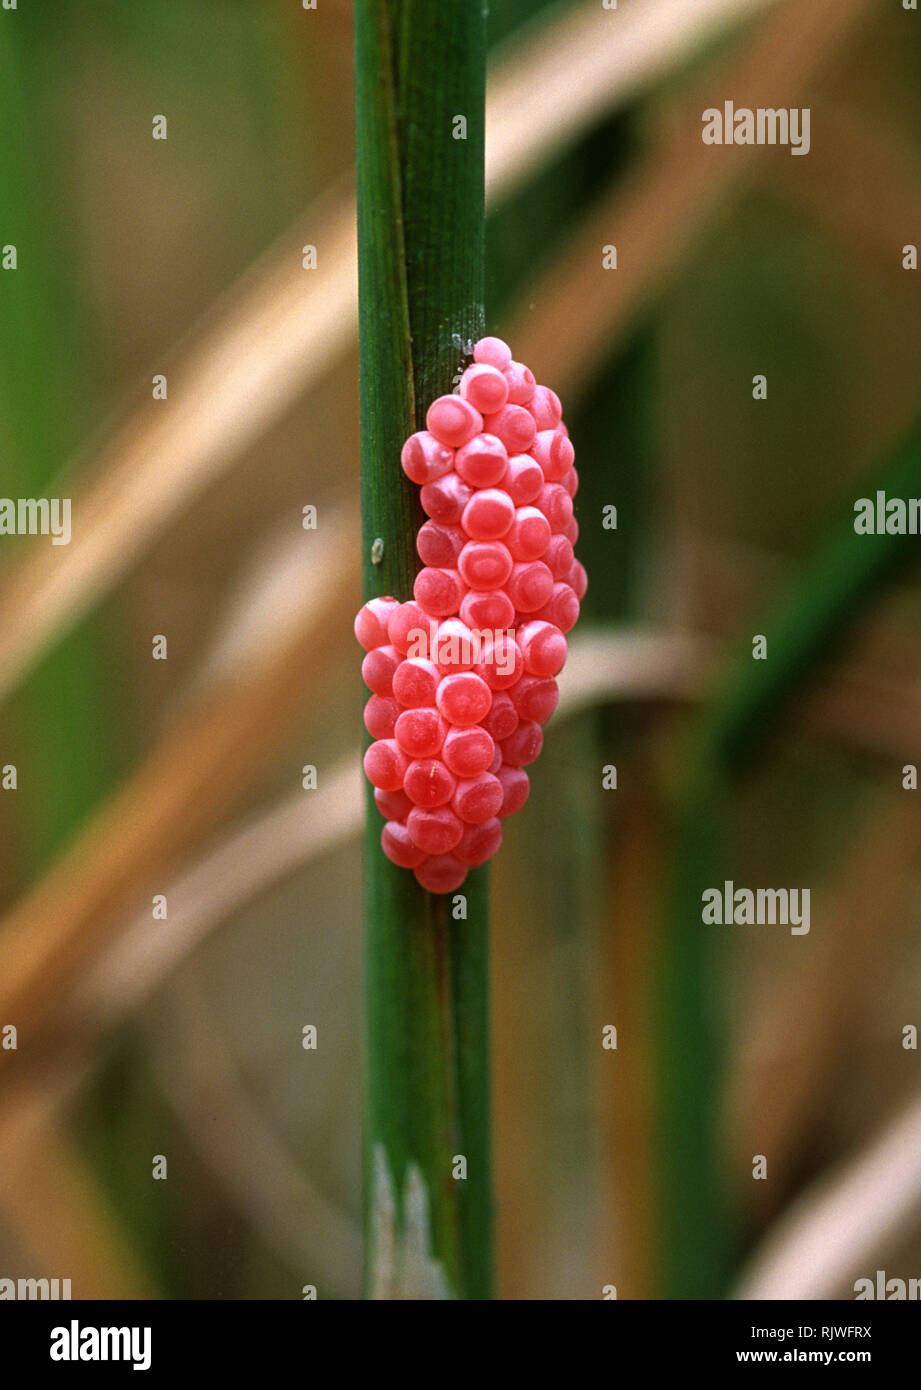 Eggs of golden apple snail or channelled apple snail, Pomacea caniculata, in a rice paddy, Luzon, Philippines Stock Photo